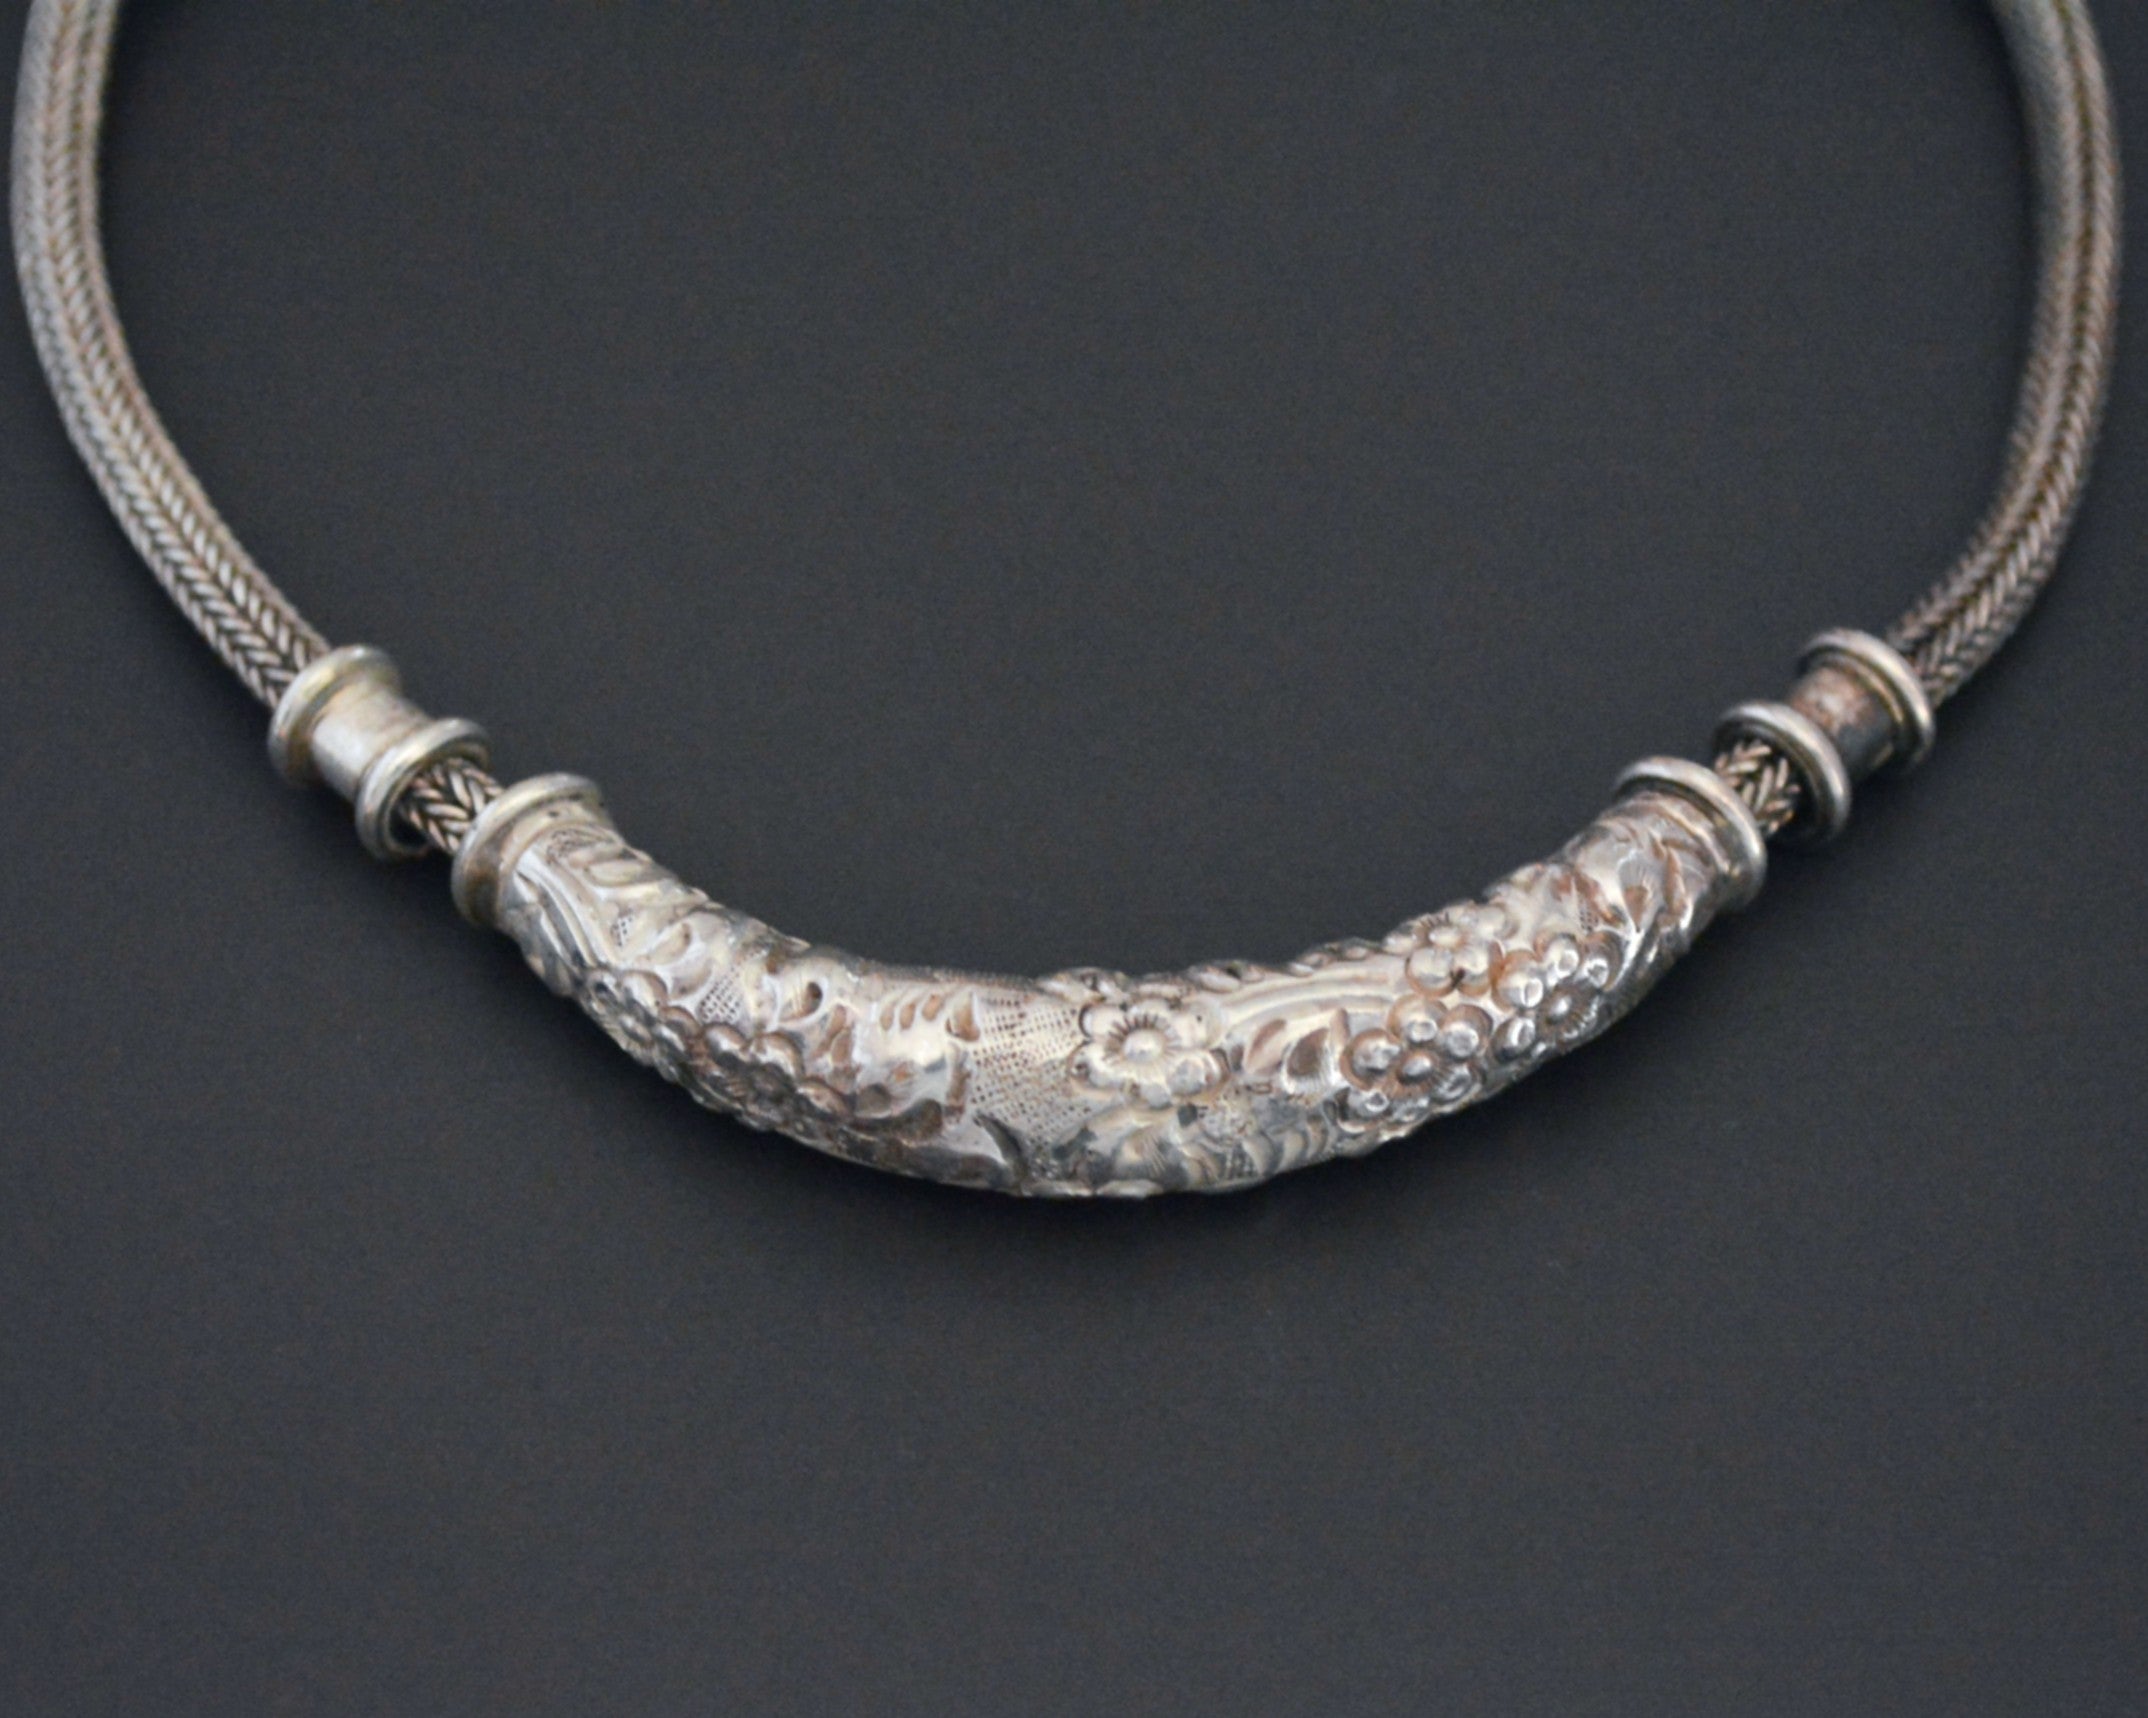 Bali Braided Snake Chain Necklace with Silver Parts